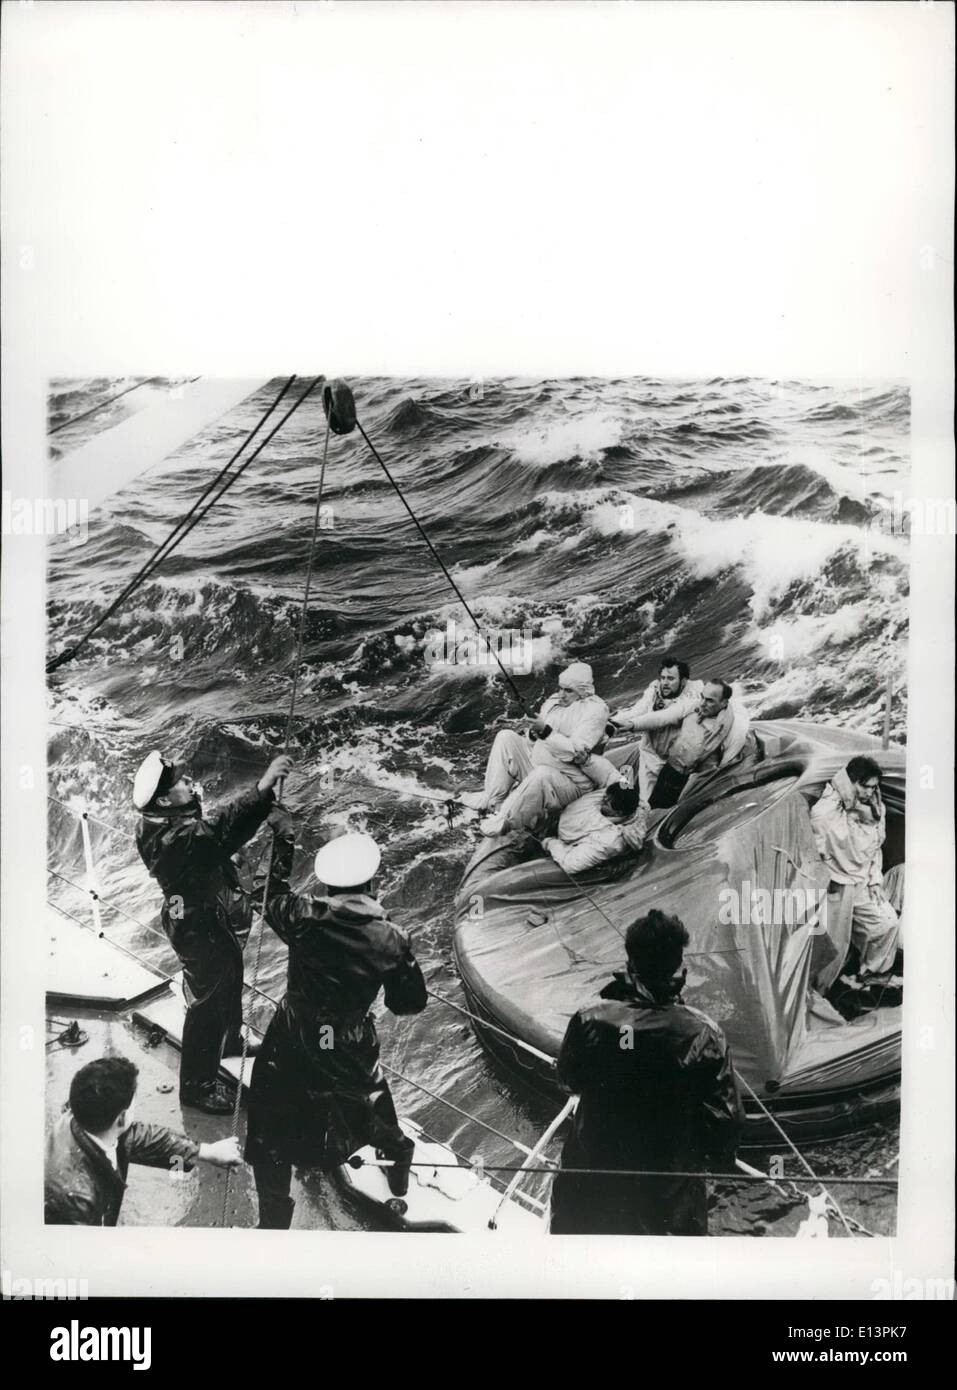 Mar. 22, 2012 - British Official Photograph-Admiralty. Issued by Central Office of Information.: Rough Seas Foil Atlantic Survival Tests.: Two groups of Naval Volunteers had a really rough time in the Atlantic over the week-end when the Ocean turned its vicious worst on five-day survival tests from the destroyer ''Carron''. The first group entered the water on Saturday - and had to be fished out ninety minutes later - when their raft was made unseaworthy by the battering seas Stock Photo